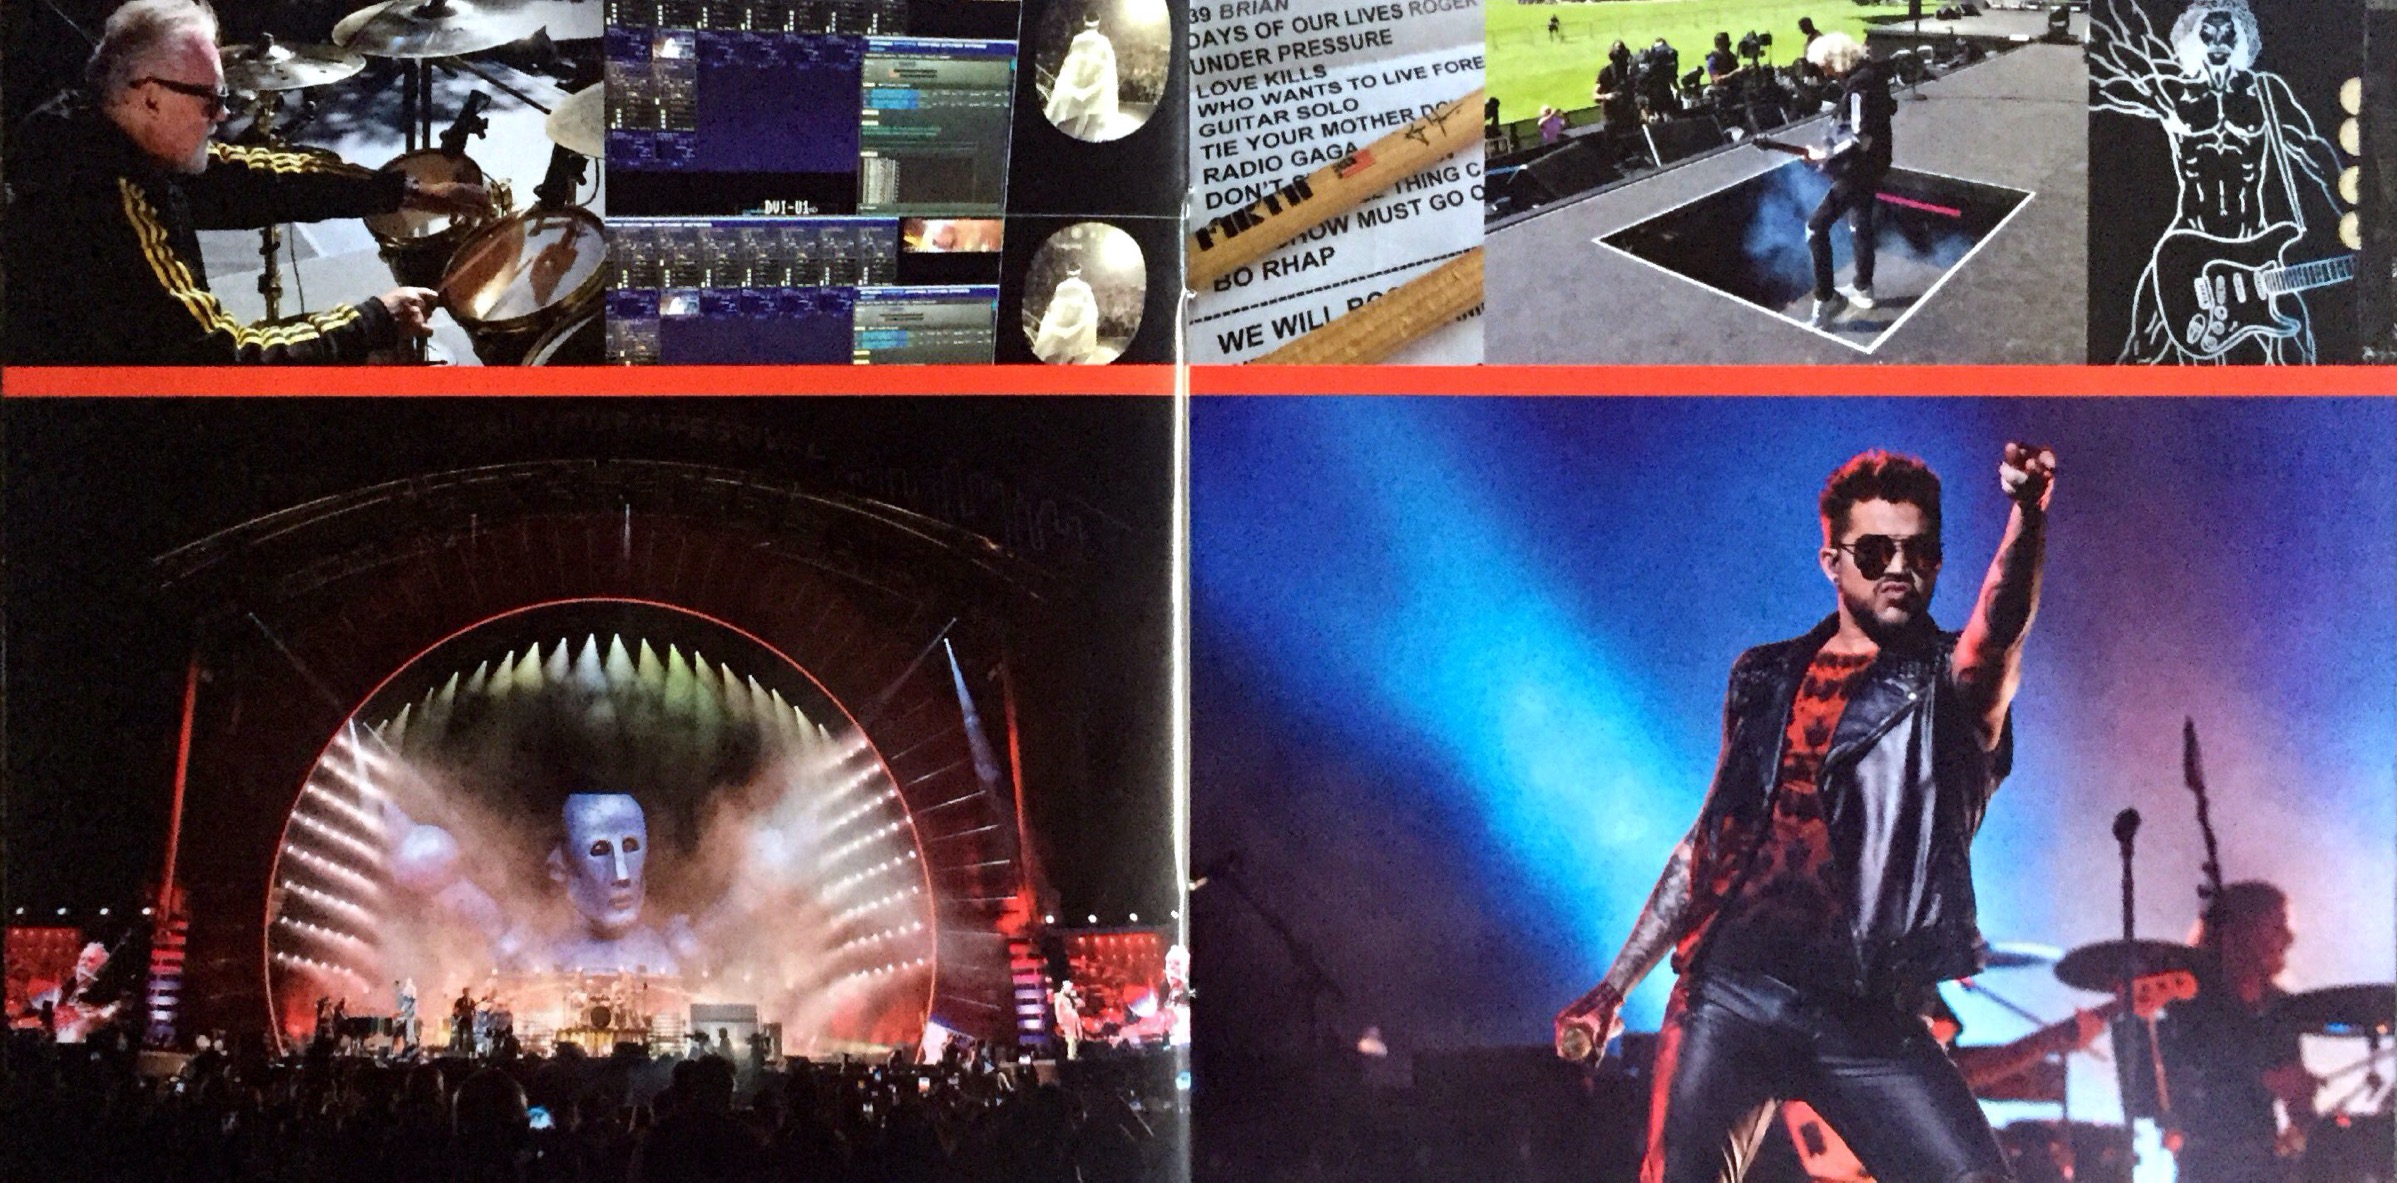 2-page spread from the Live Around The World album booklet by Queen and Adam Lambert. The left page shows a photo of the stage from a distance, with spotlights from all angles around its upper archway, and the head and shoulders of Frank The Robot filling the back screen. The right page shows a photo of Adam striking a powerful pose, punching the air high in front of him